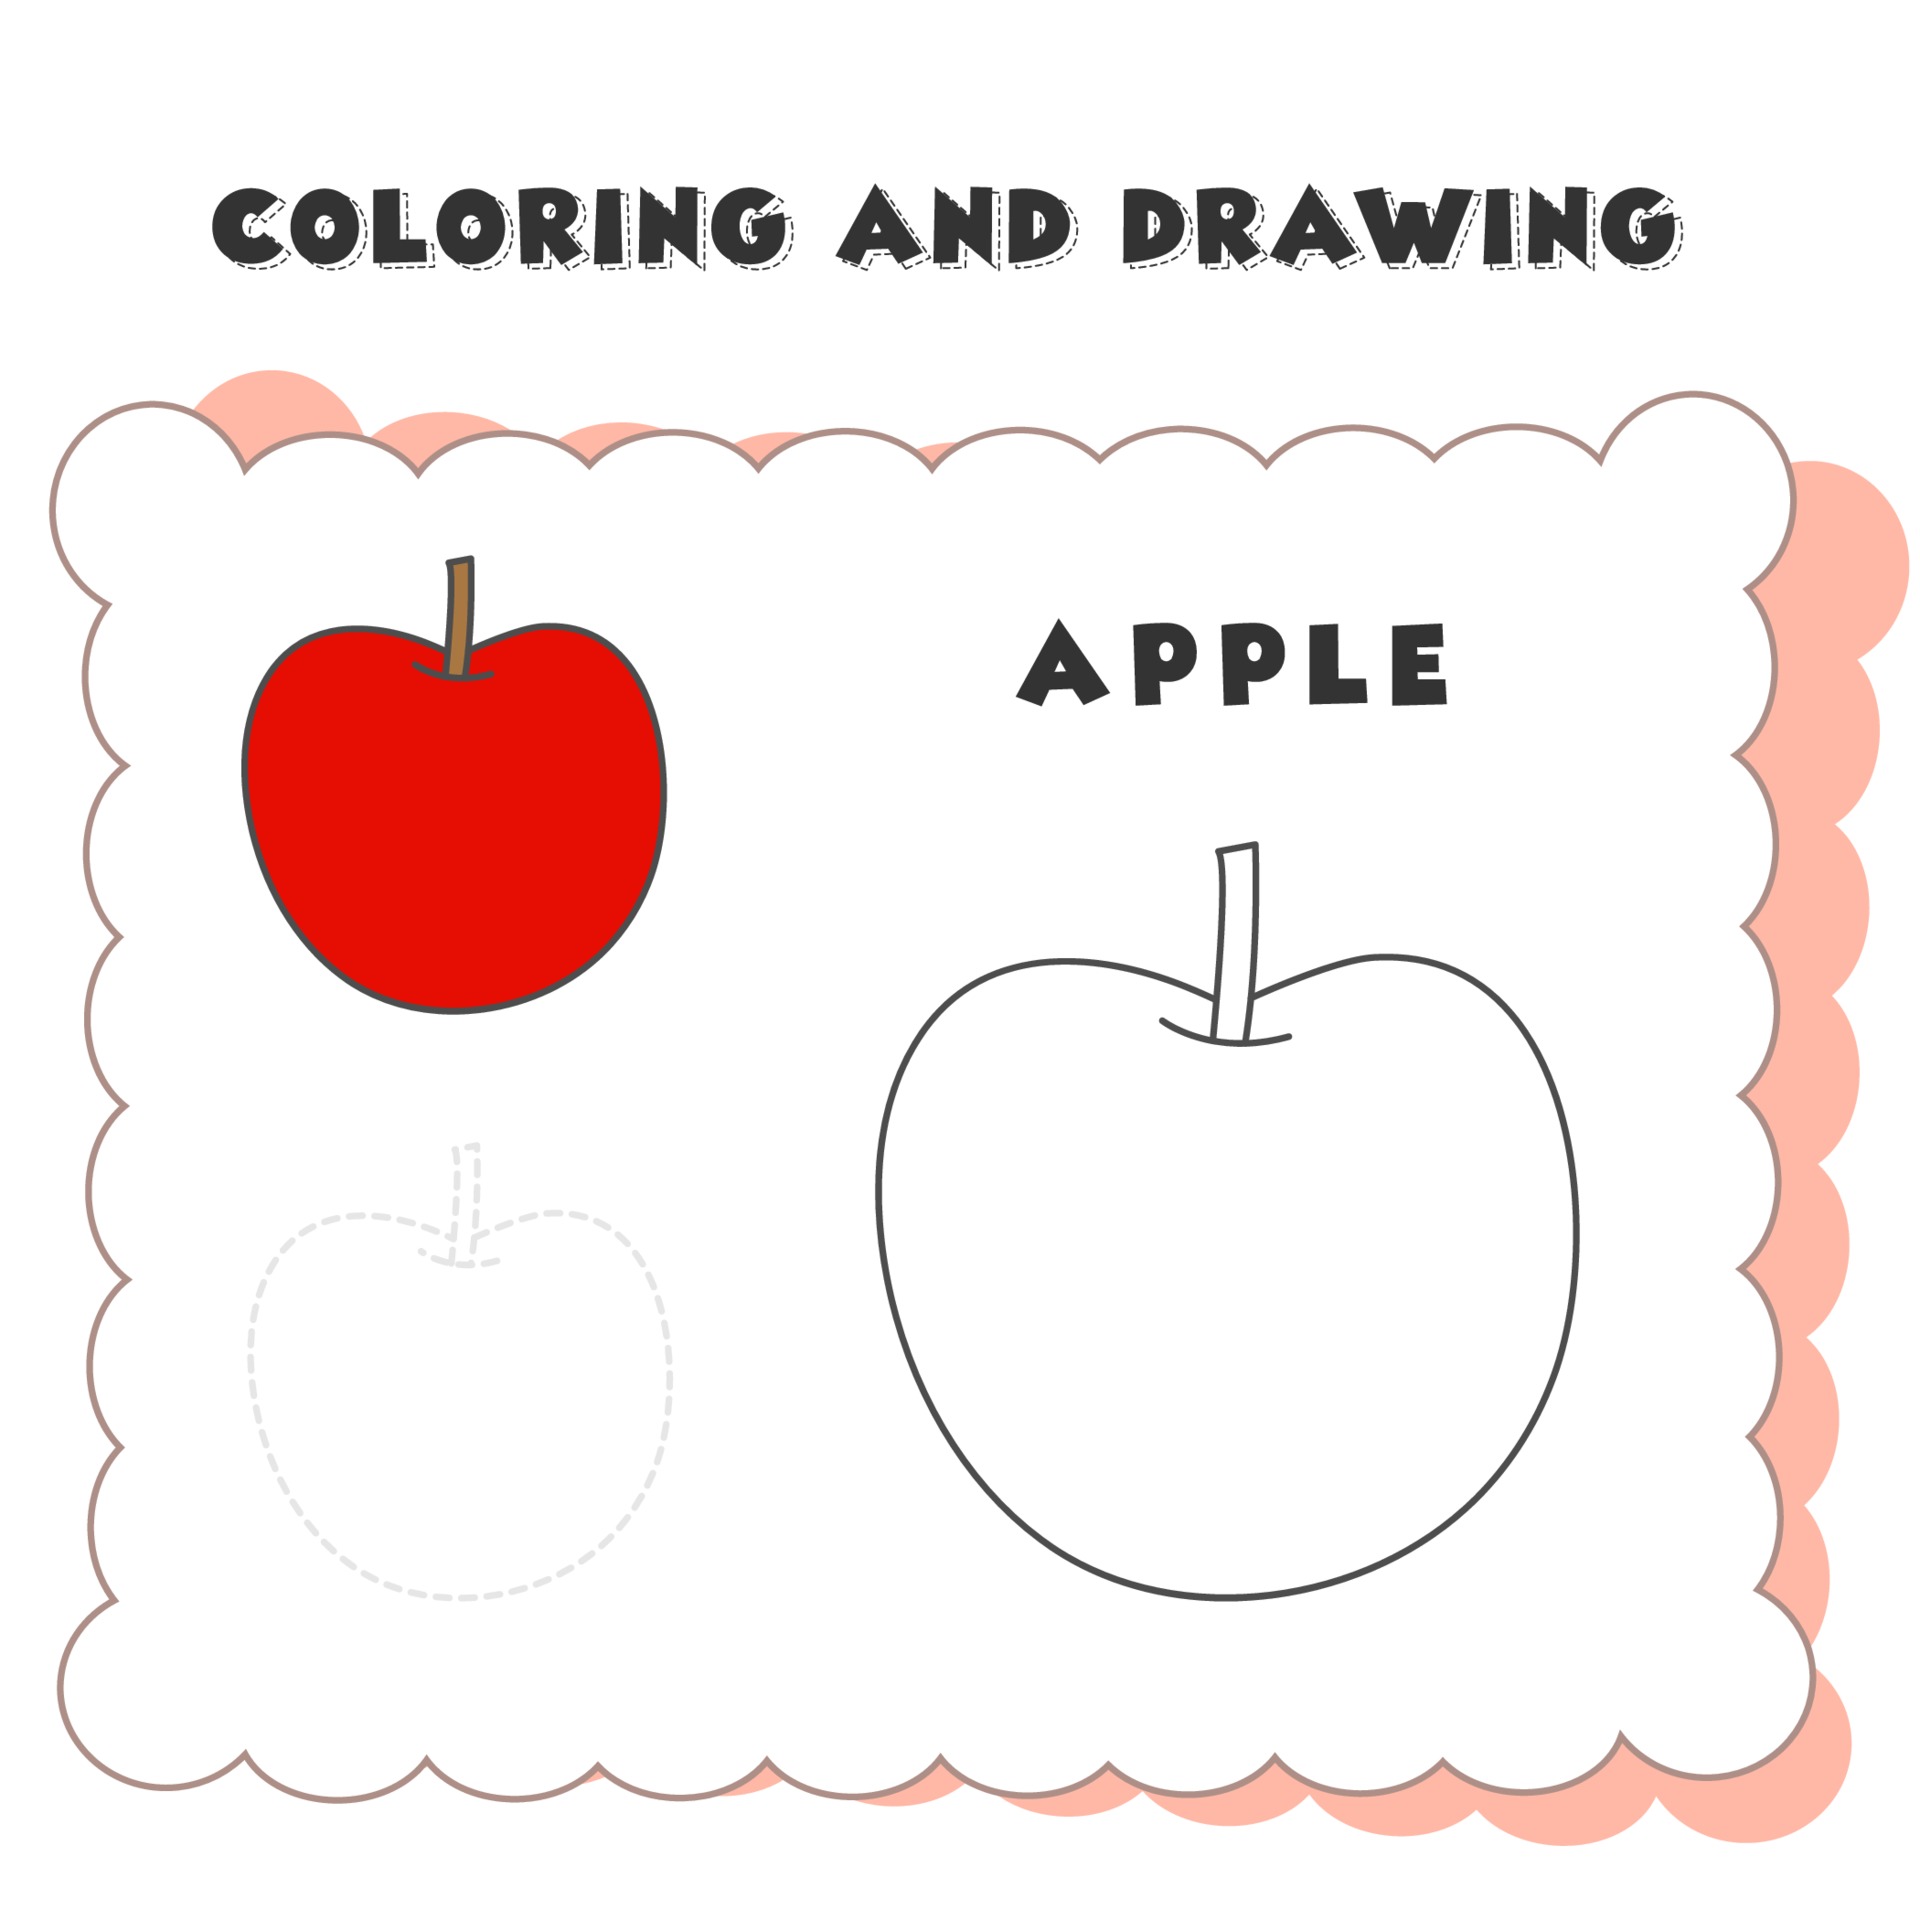 How to Draw an Apple Step-by-Step for Kids (In 8 Easy Steps)